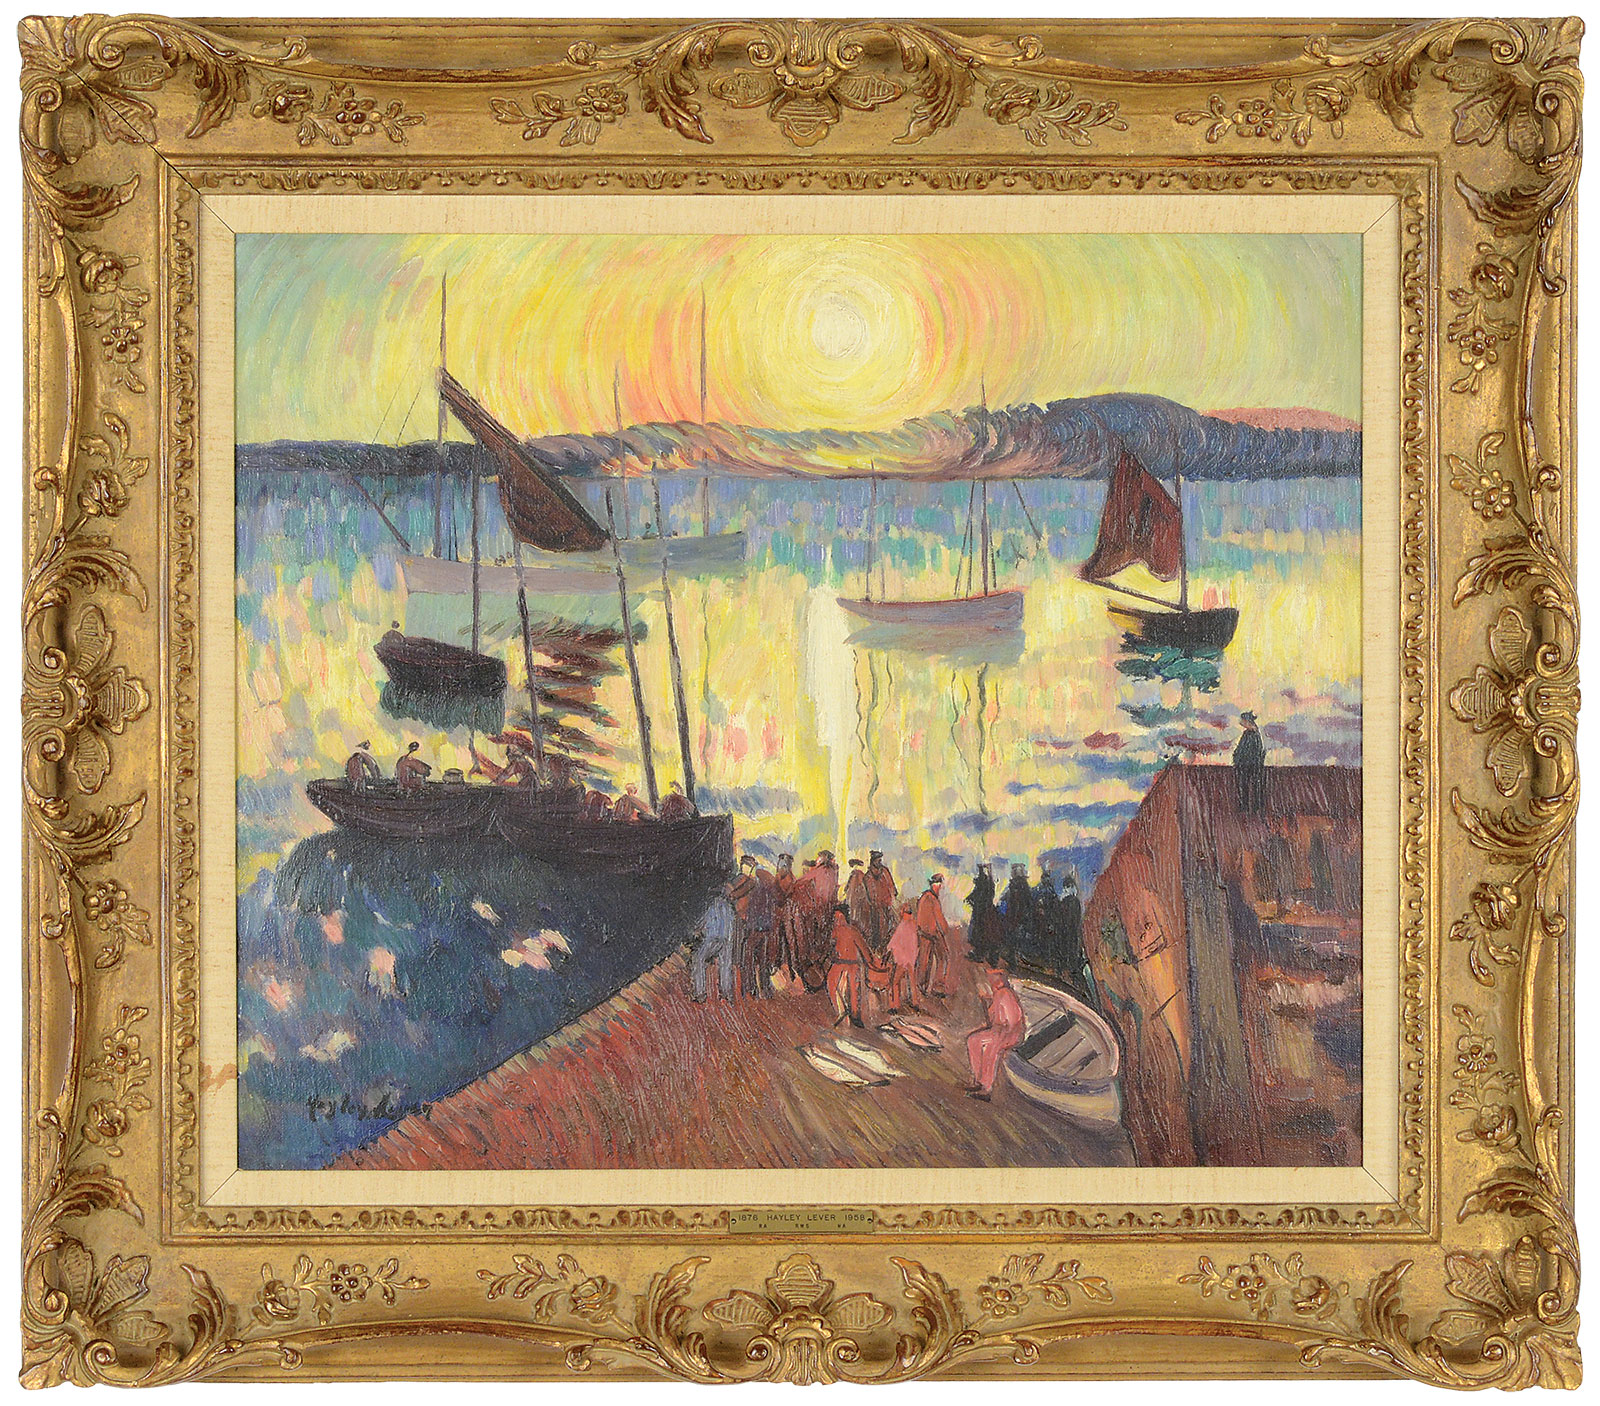 Hayler Lever (American, 1875-1958) "Fishing Boats - Sunrise", estimated at $50,000-100,000.